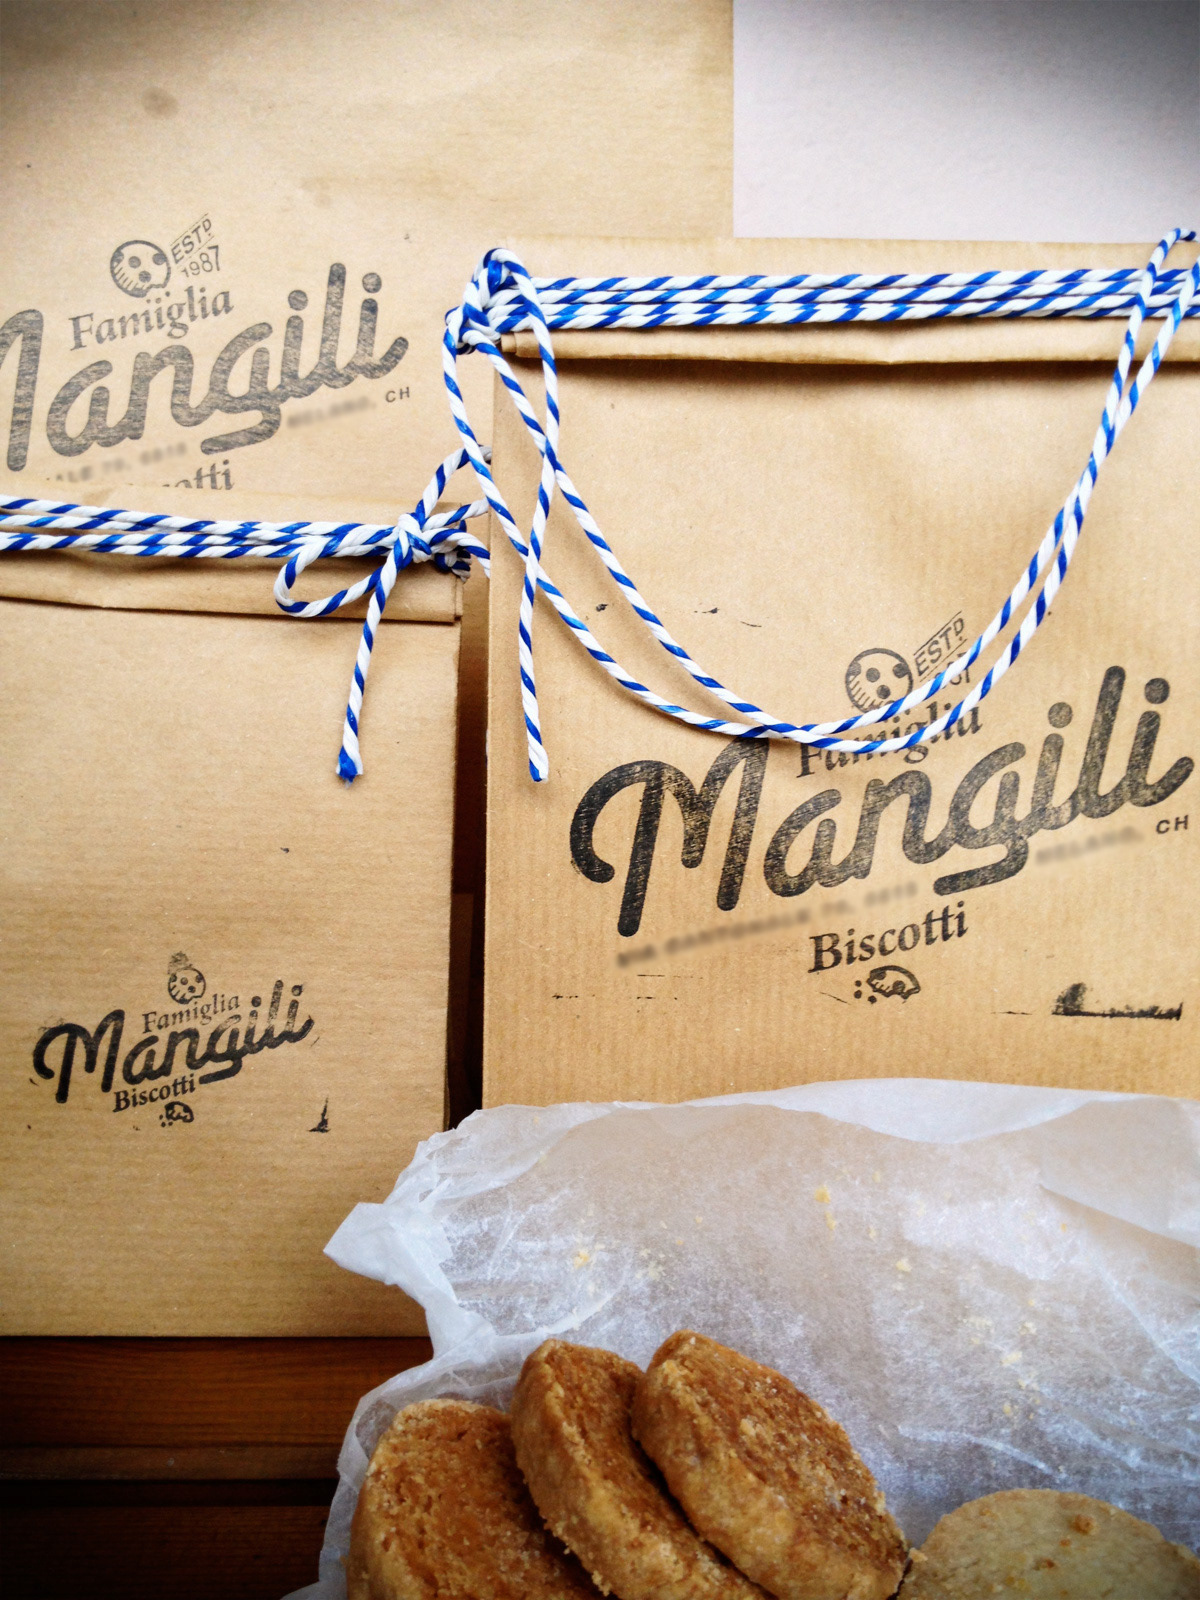 biscuits  biscotti  sable  Packaging